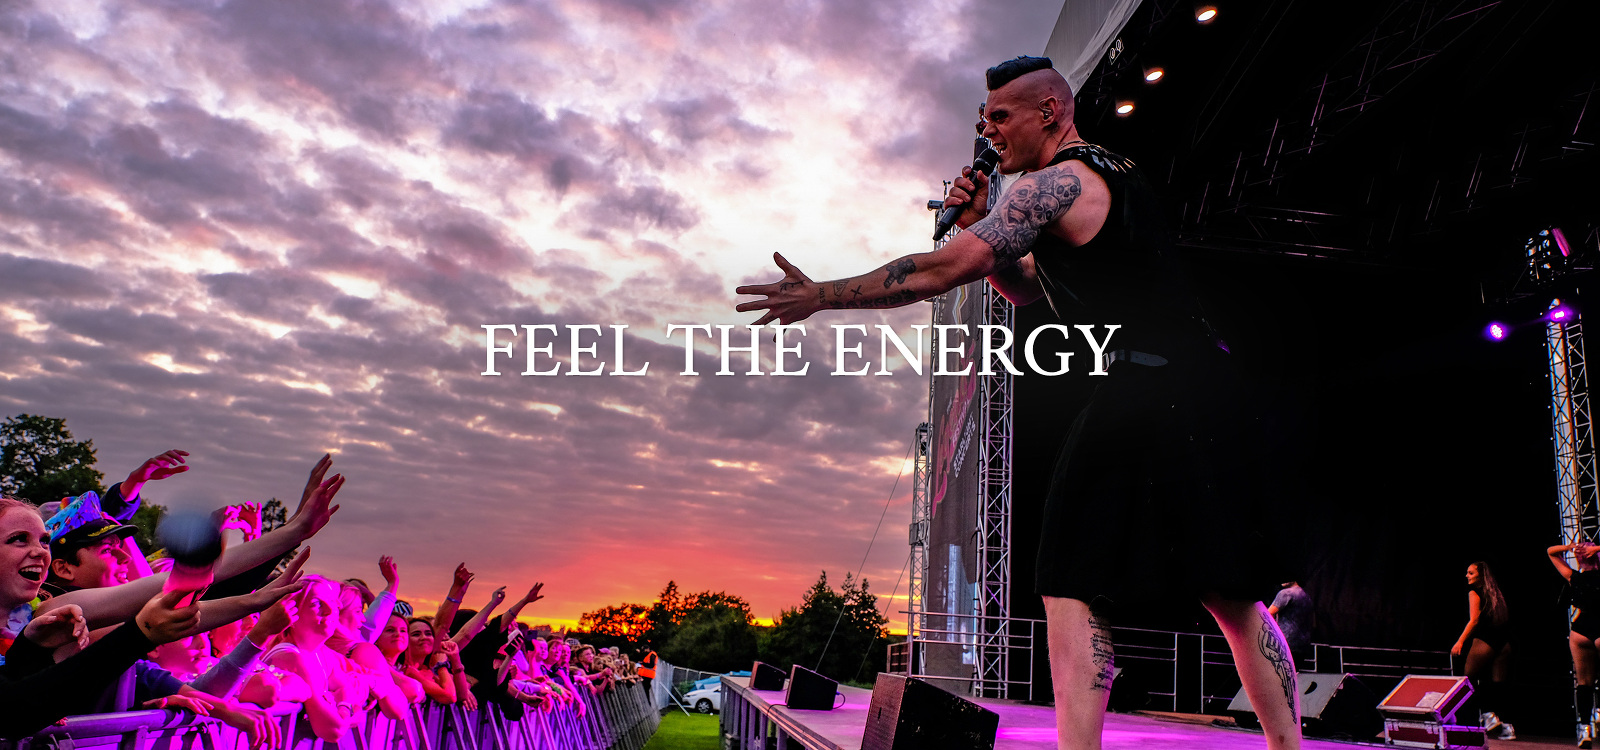 Music and Event Photographer in Surrey - Feel the Energy